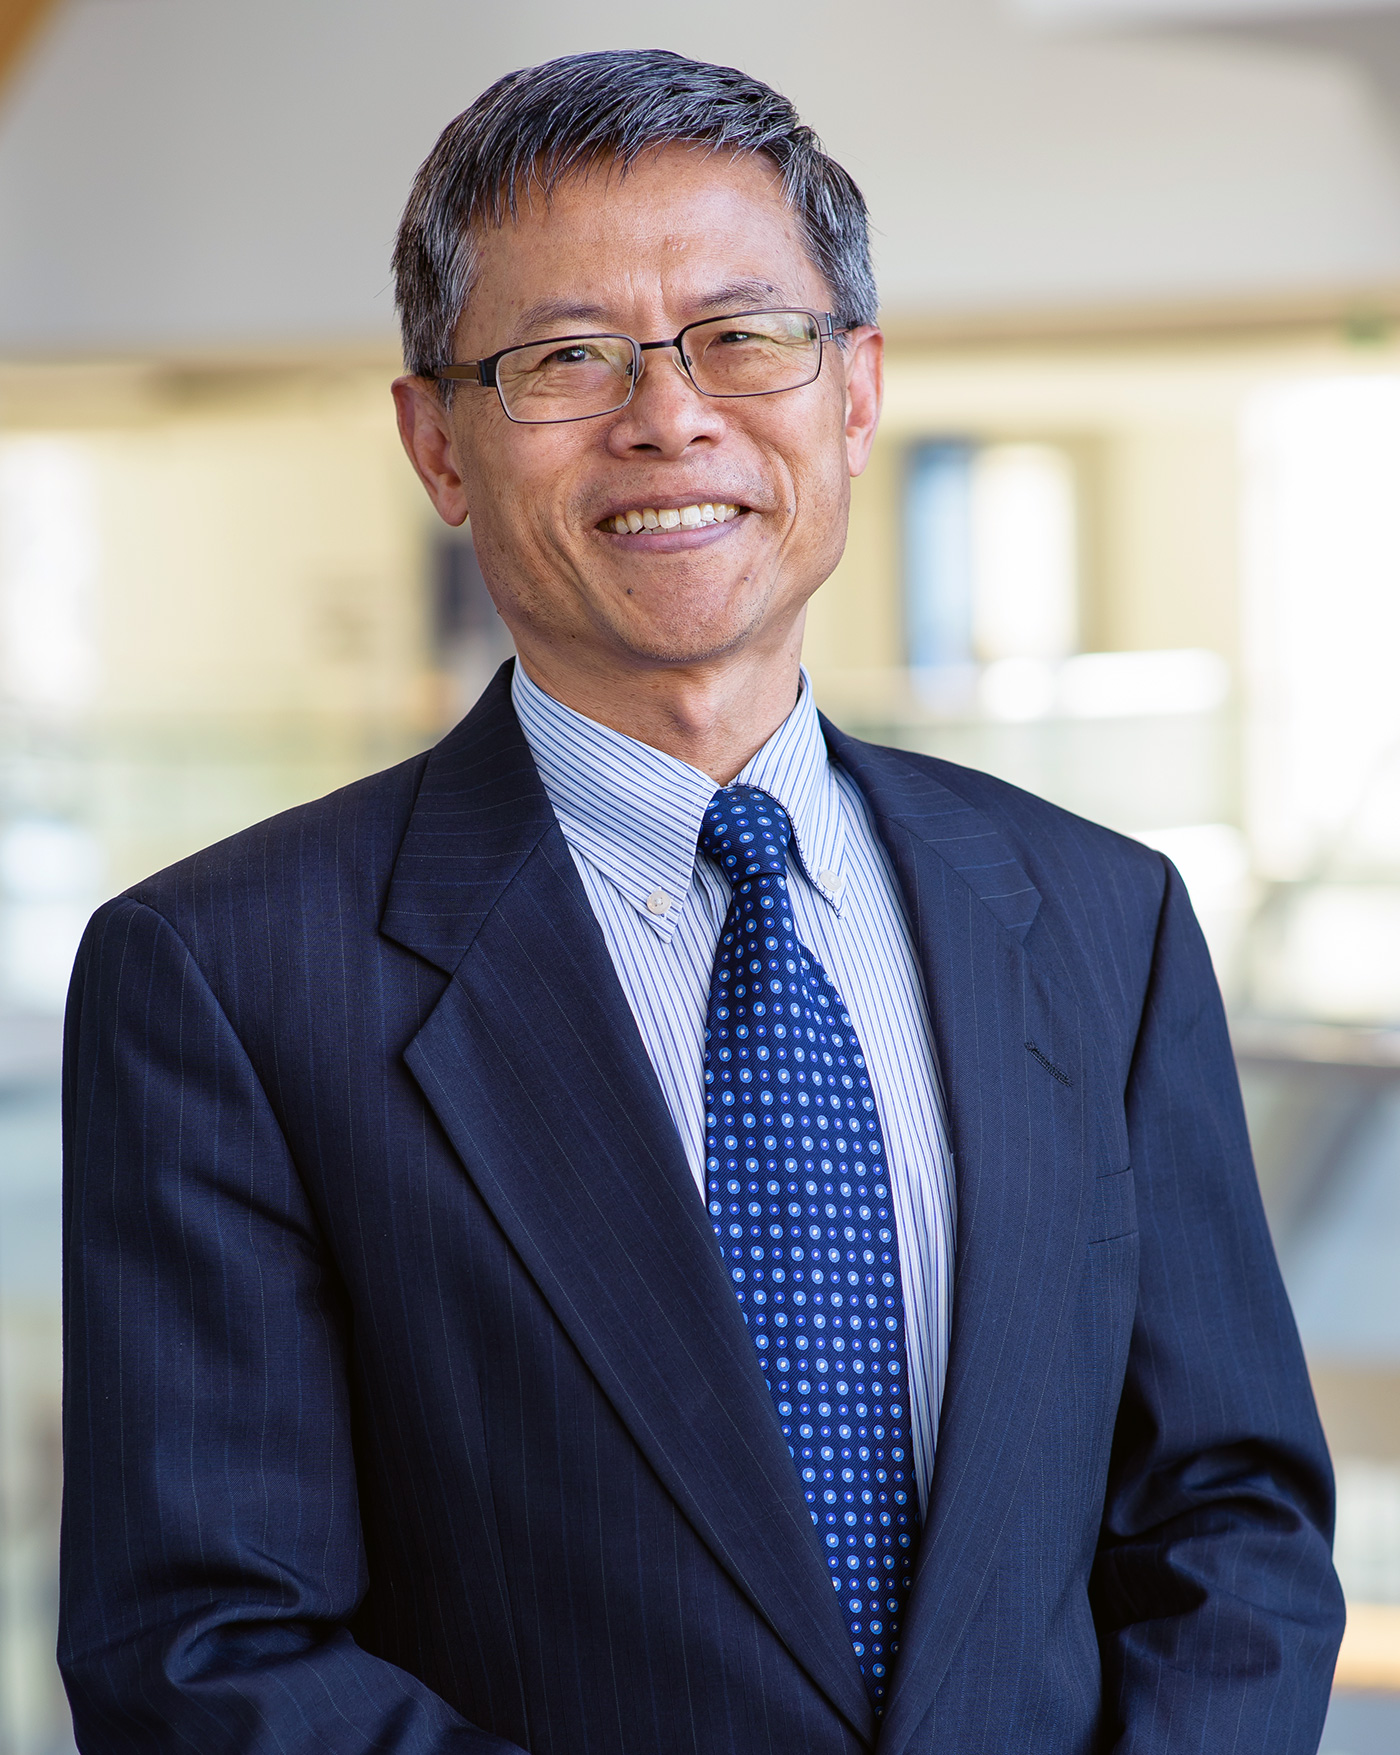 Edward T. Chen is a Professor in the Manning School of Business - Operations and Information Systems Department at UMass Lowell.